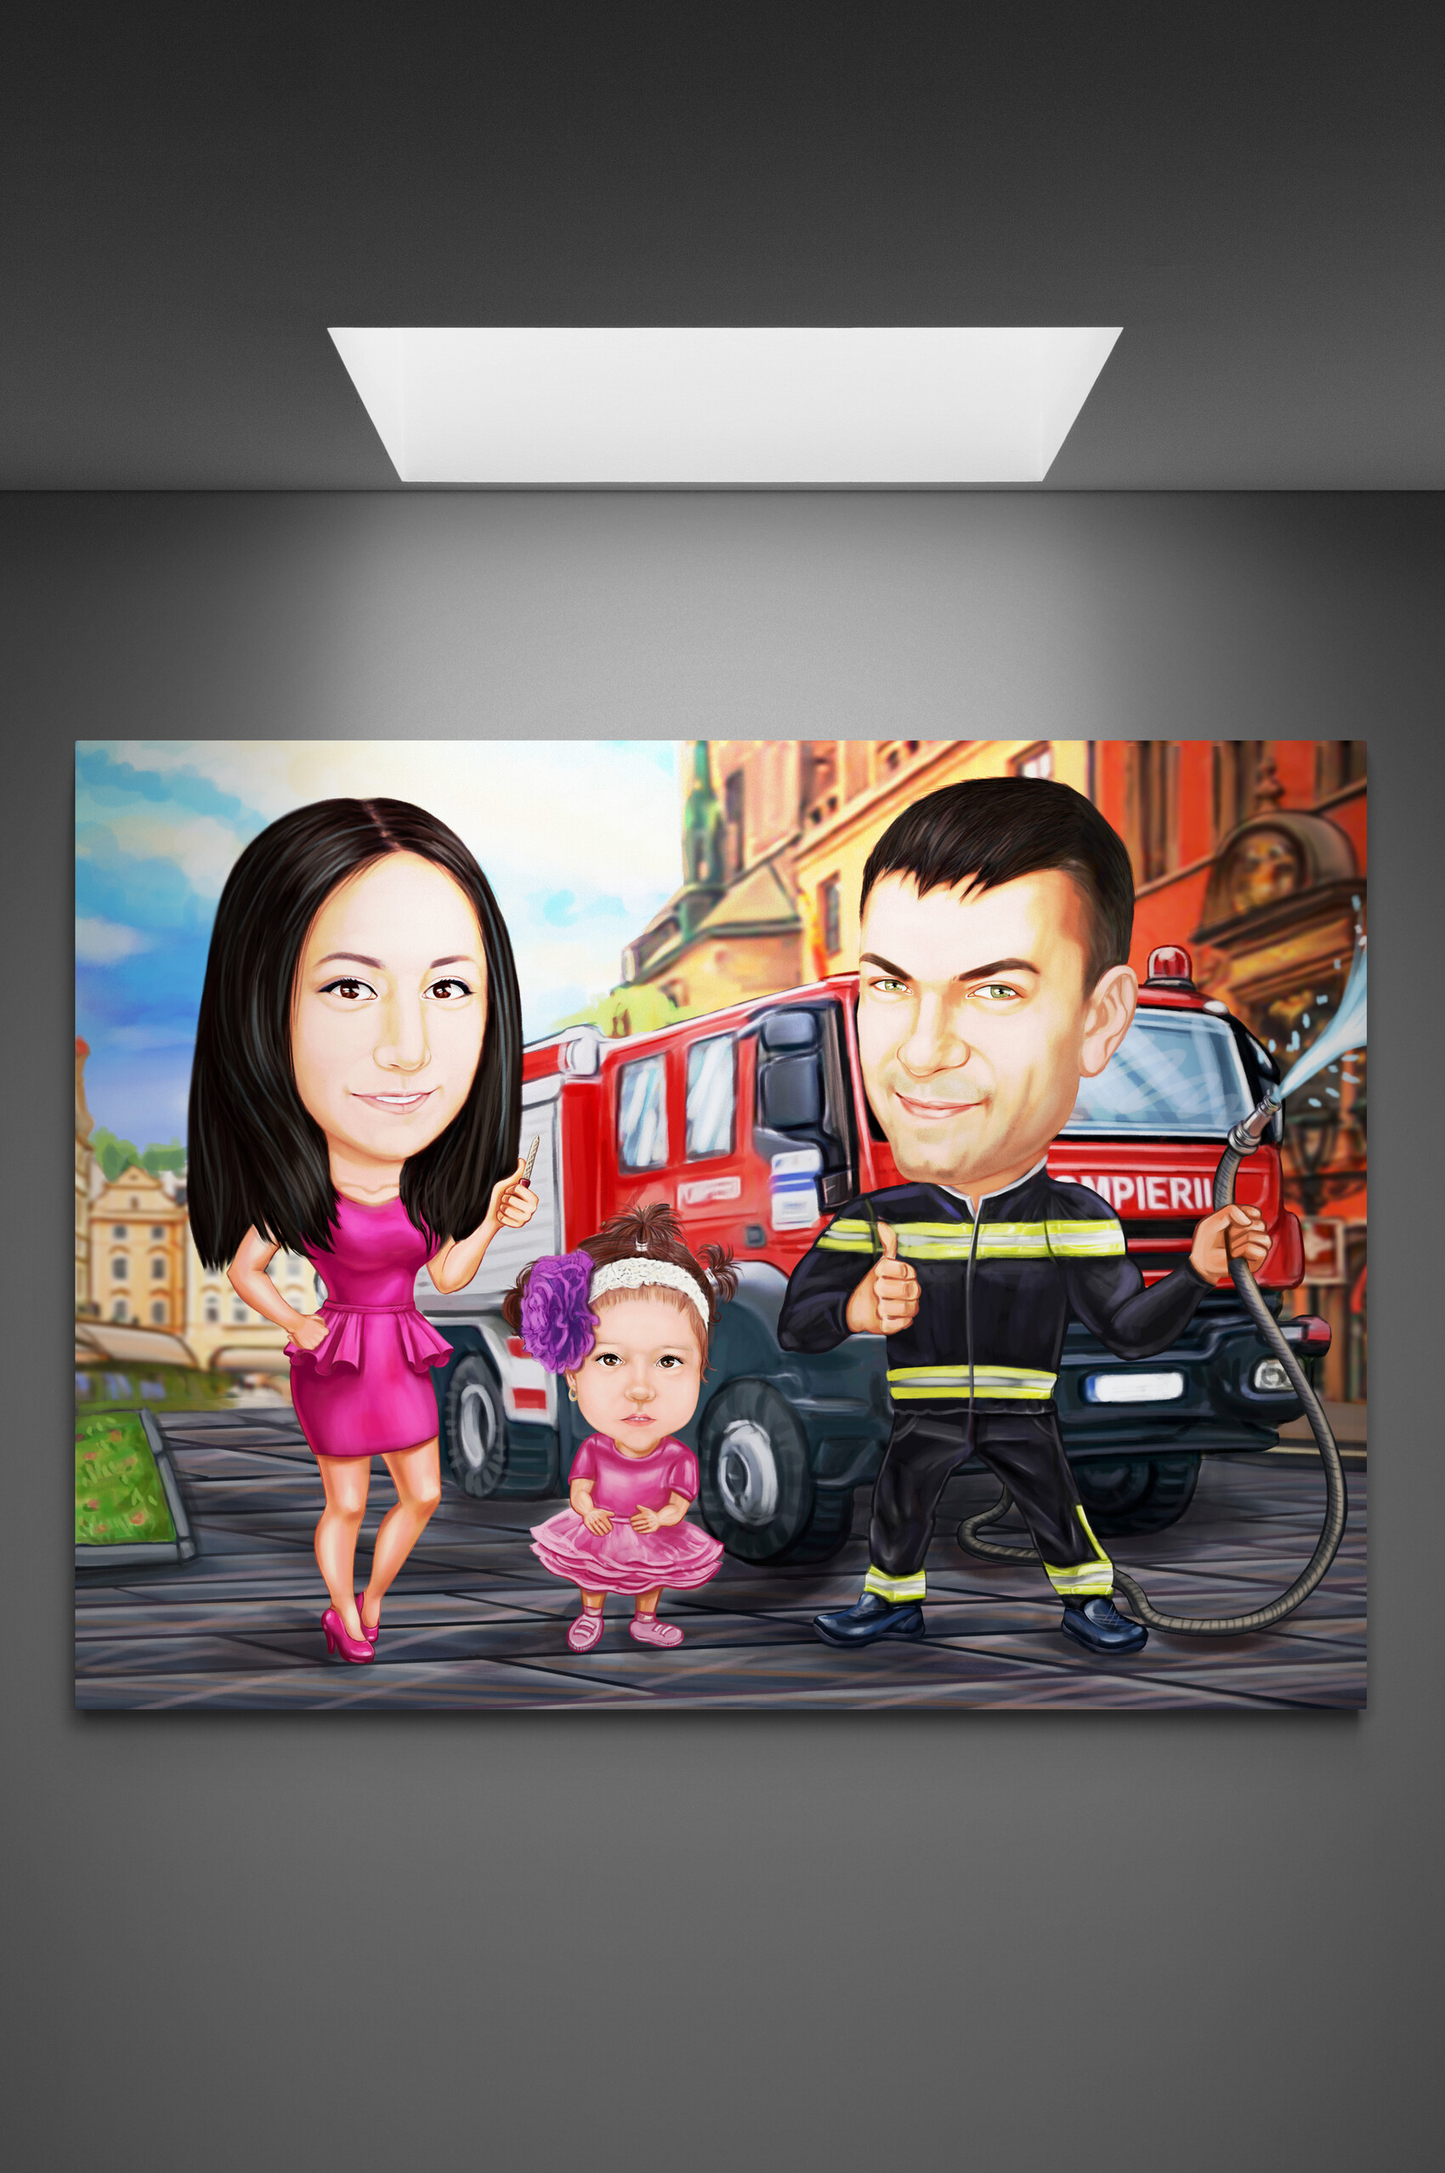 Firefighter's help family caricature